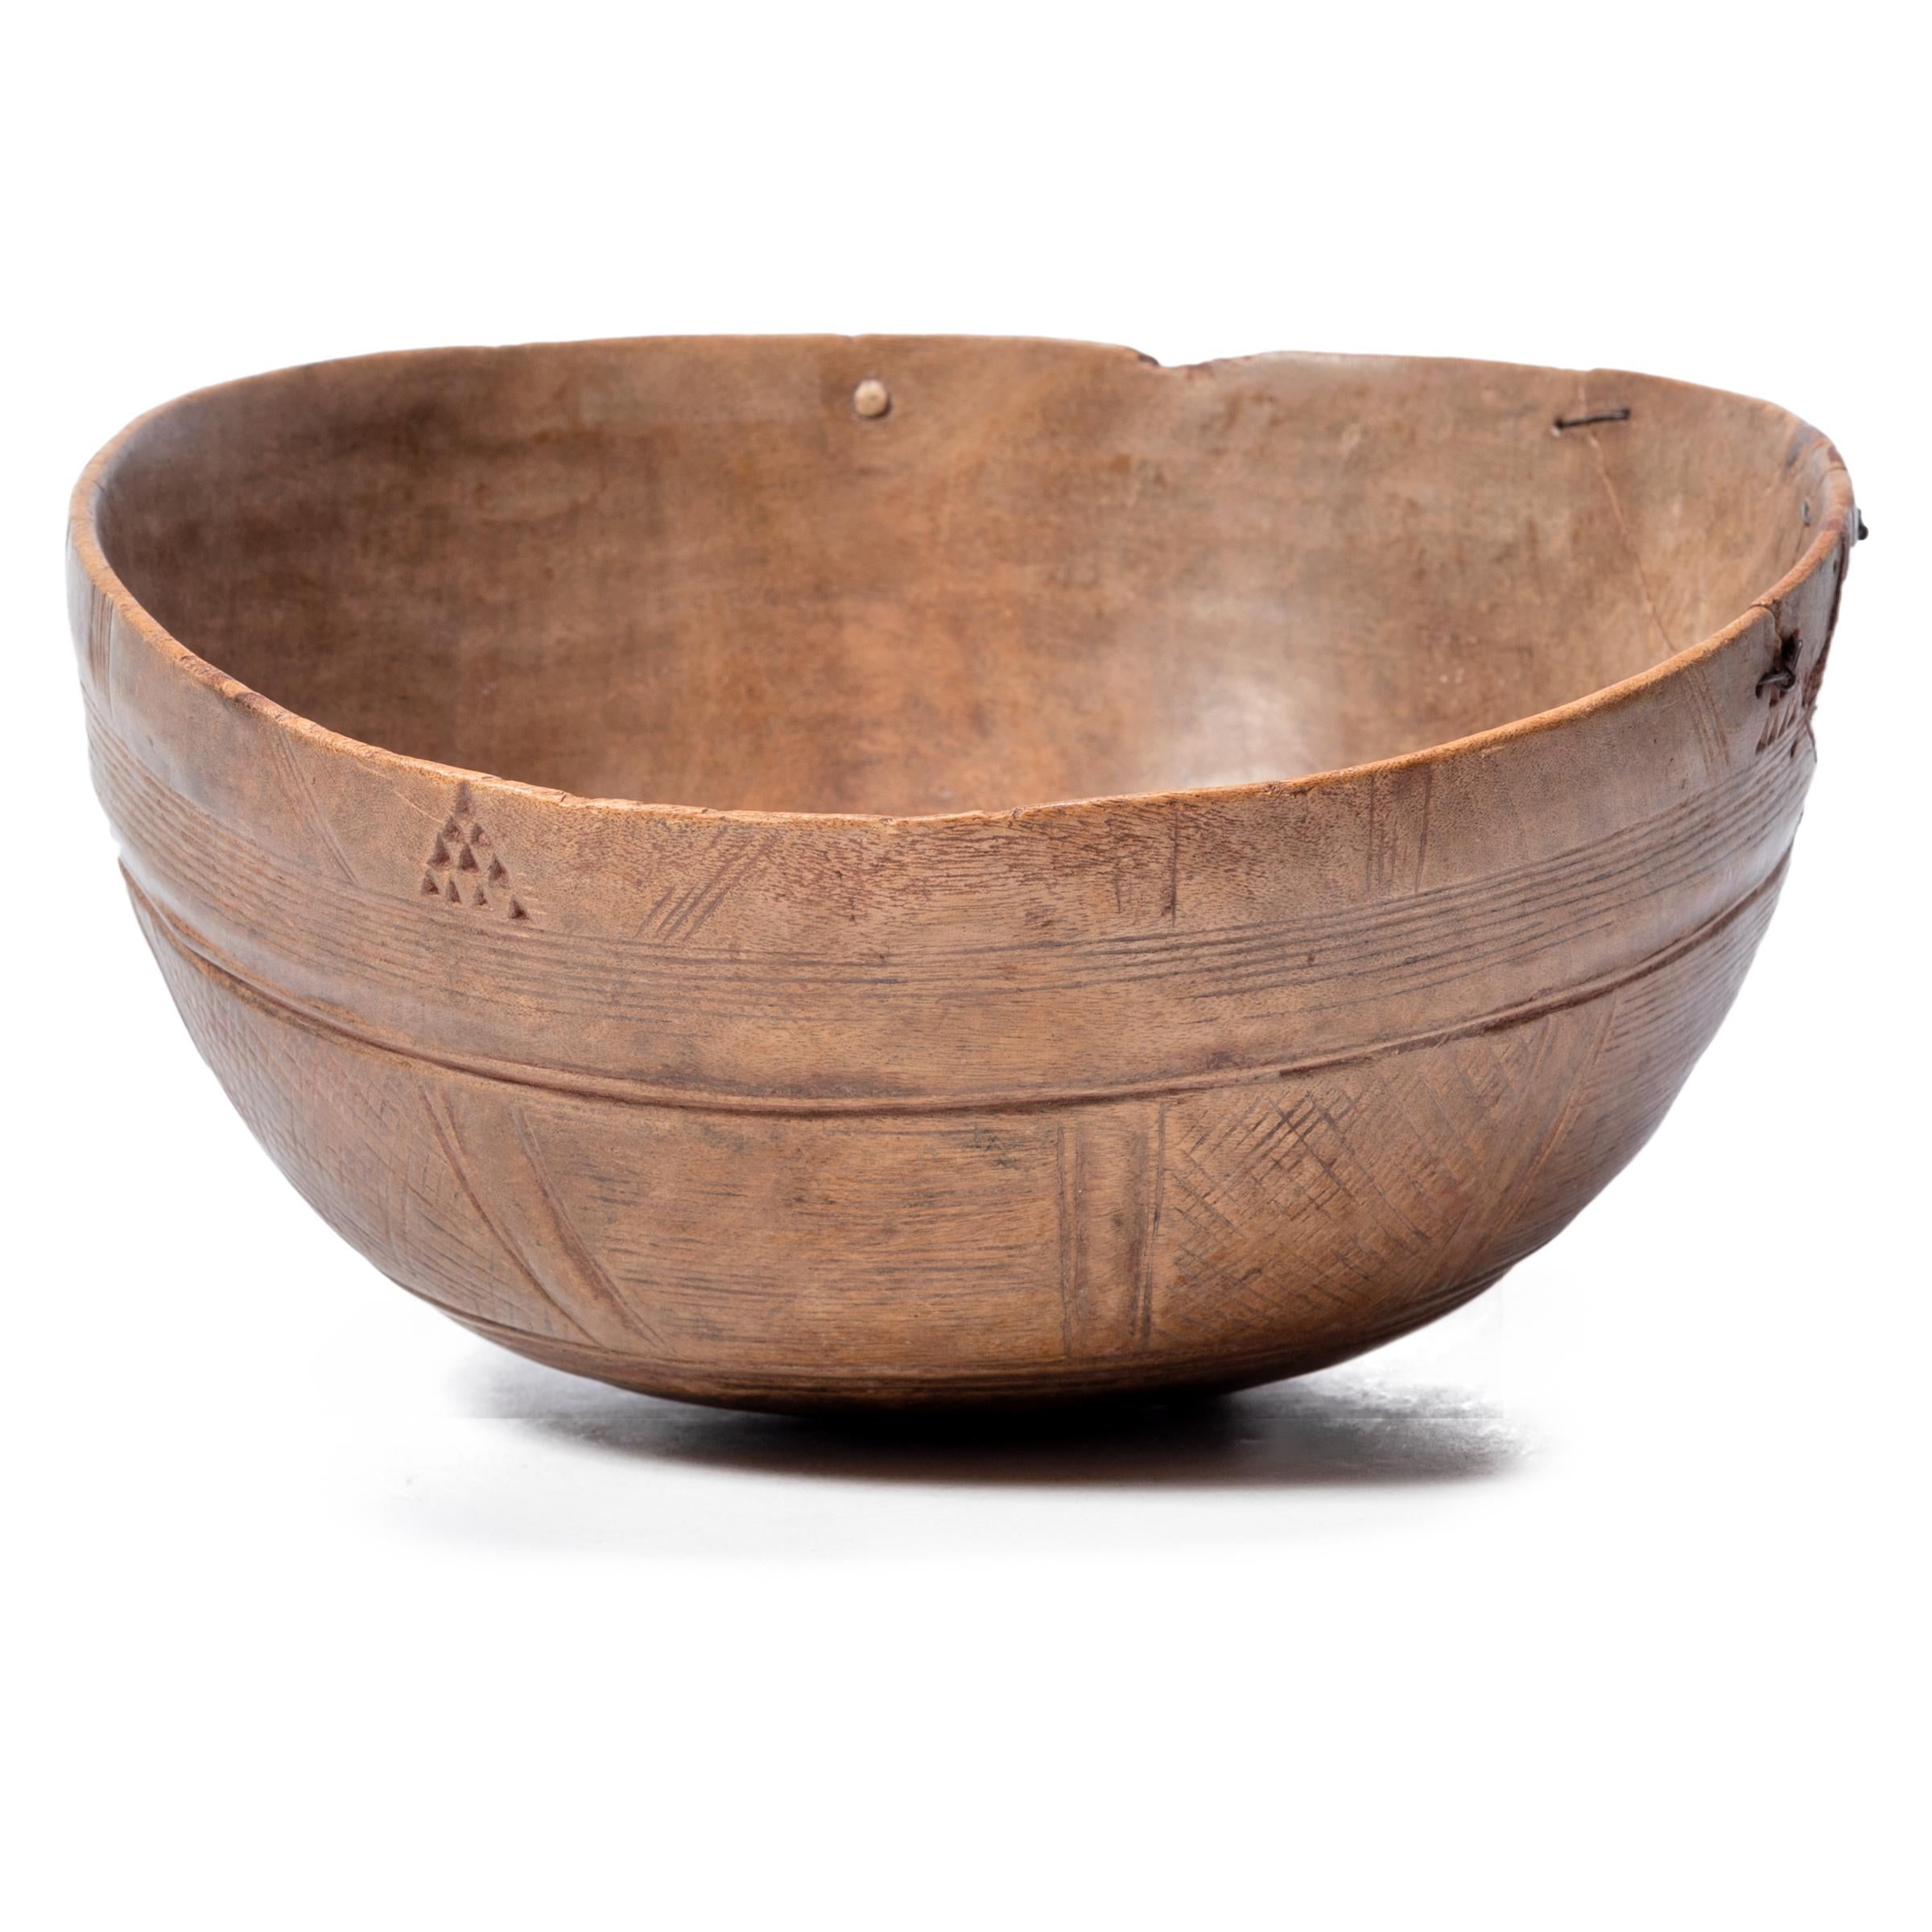 This carefully incised wooden bowl originally belonged to a Fulani family, a Muslim culture scattered throughout West Africa. Because the Fulani are frequently nomadic, they rely on neighboring cultures for the production of many of their objects.